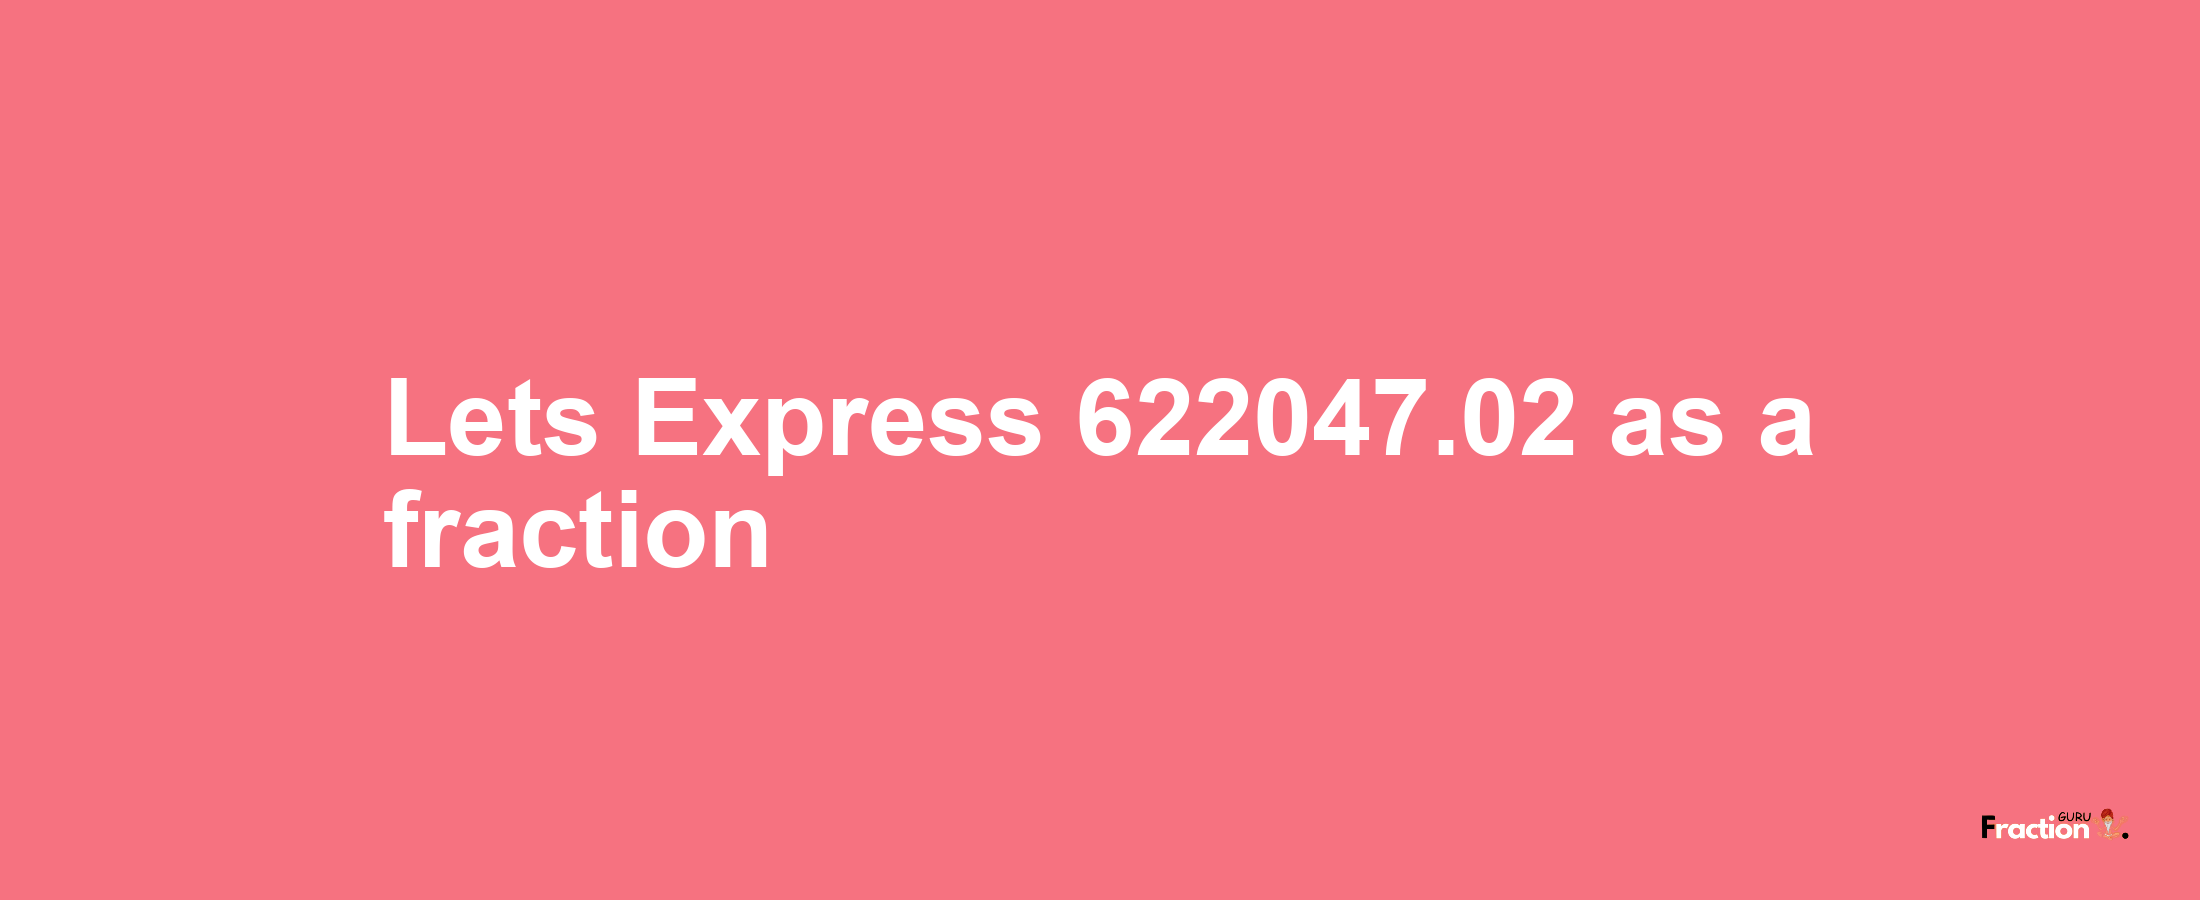 Lets Express 622047.02 as afraction